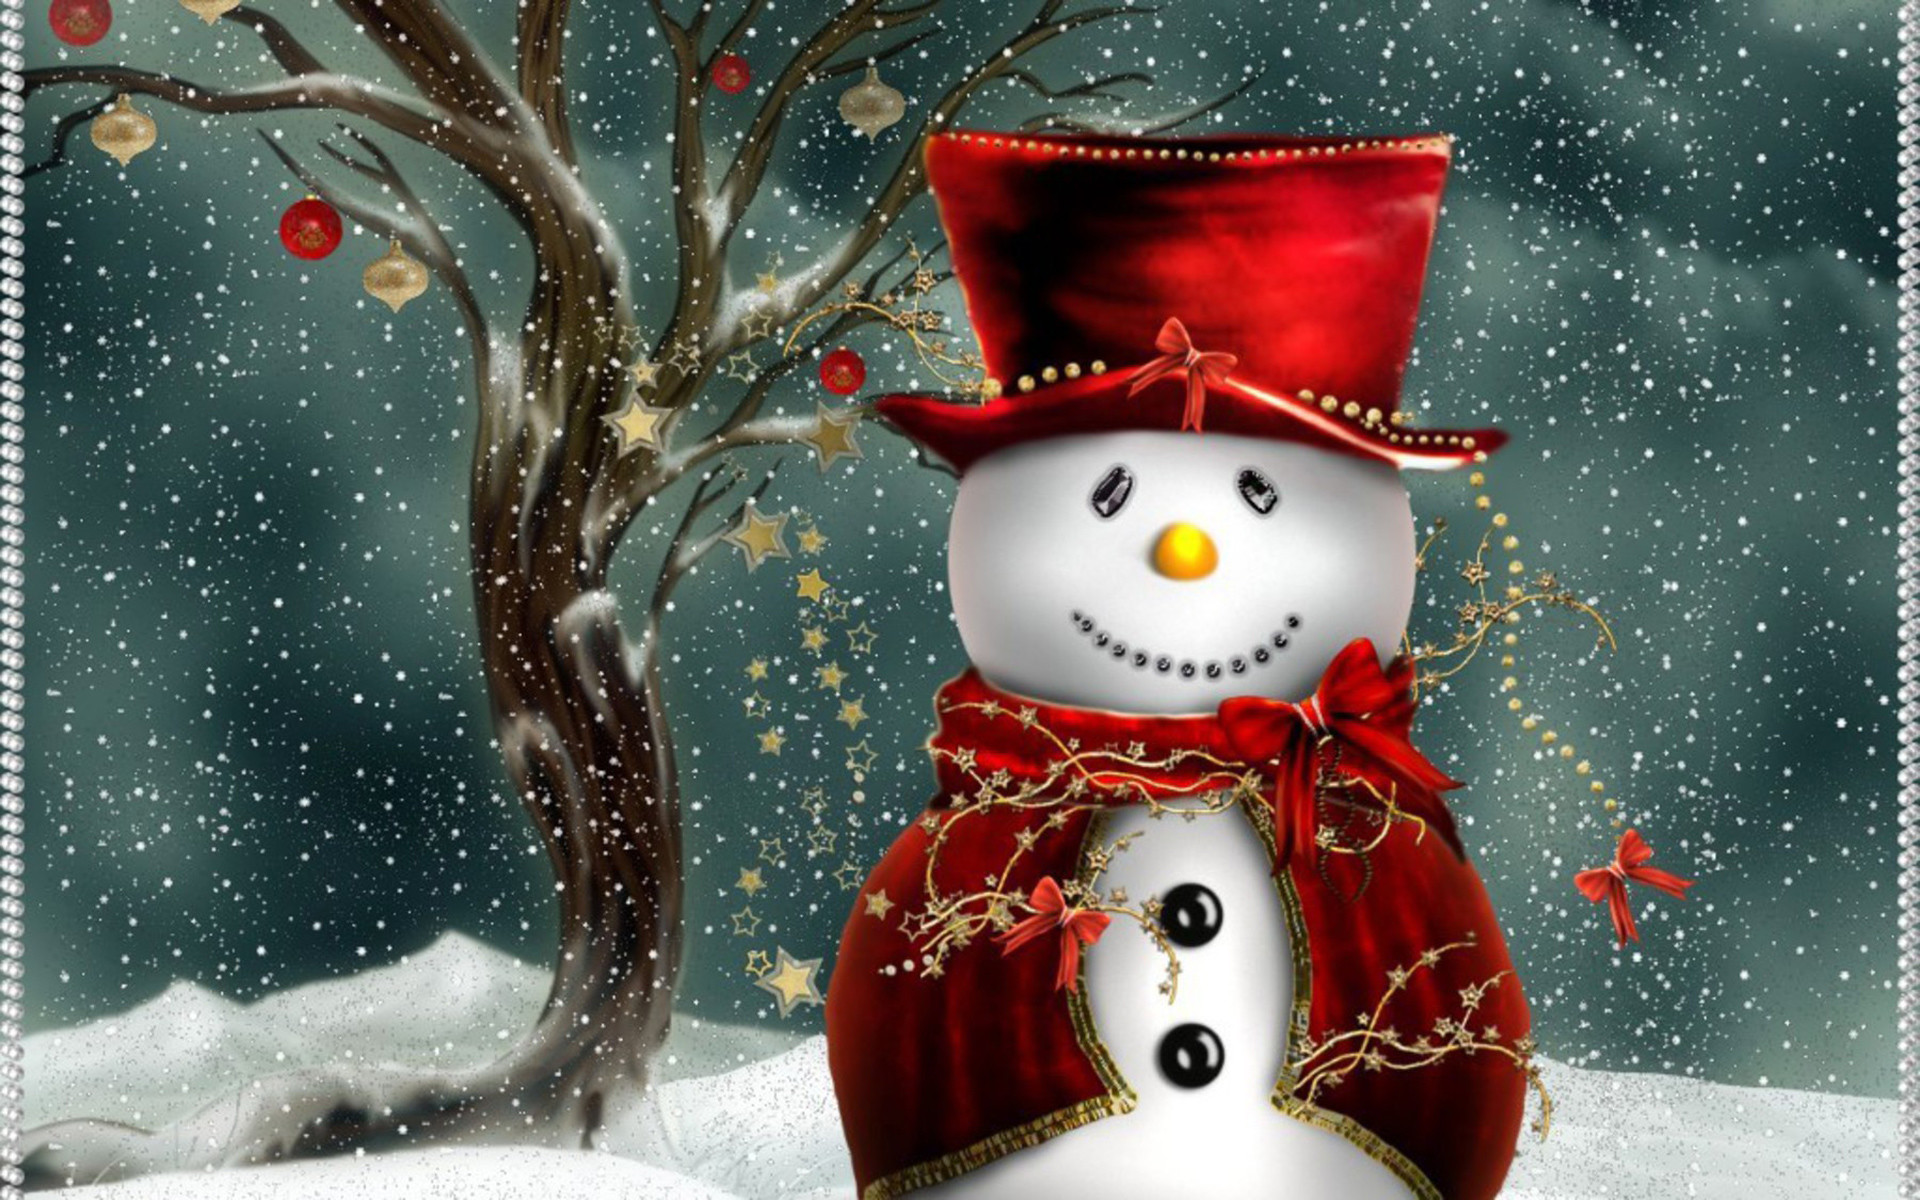 1920x1200 Cute Christmas Pictures, Wallpaper, images, Pics, Backgrounds, Photos .